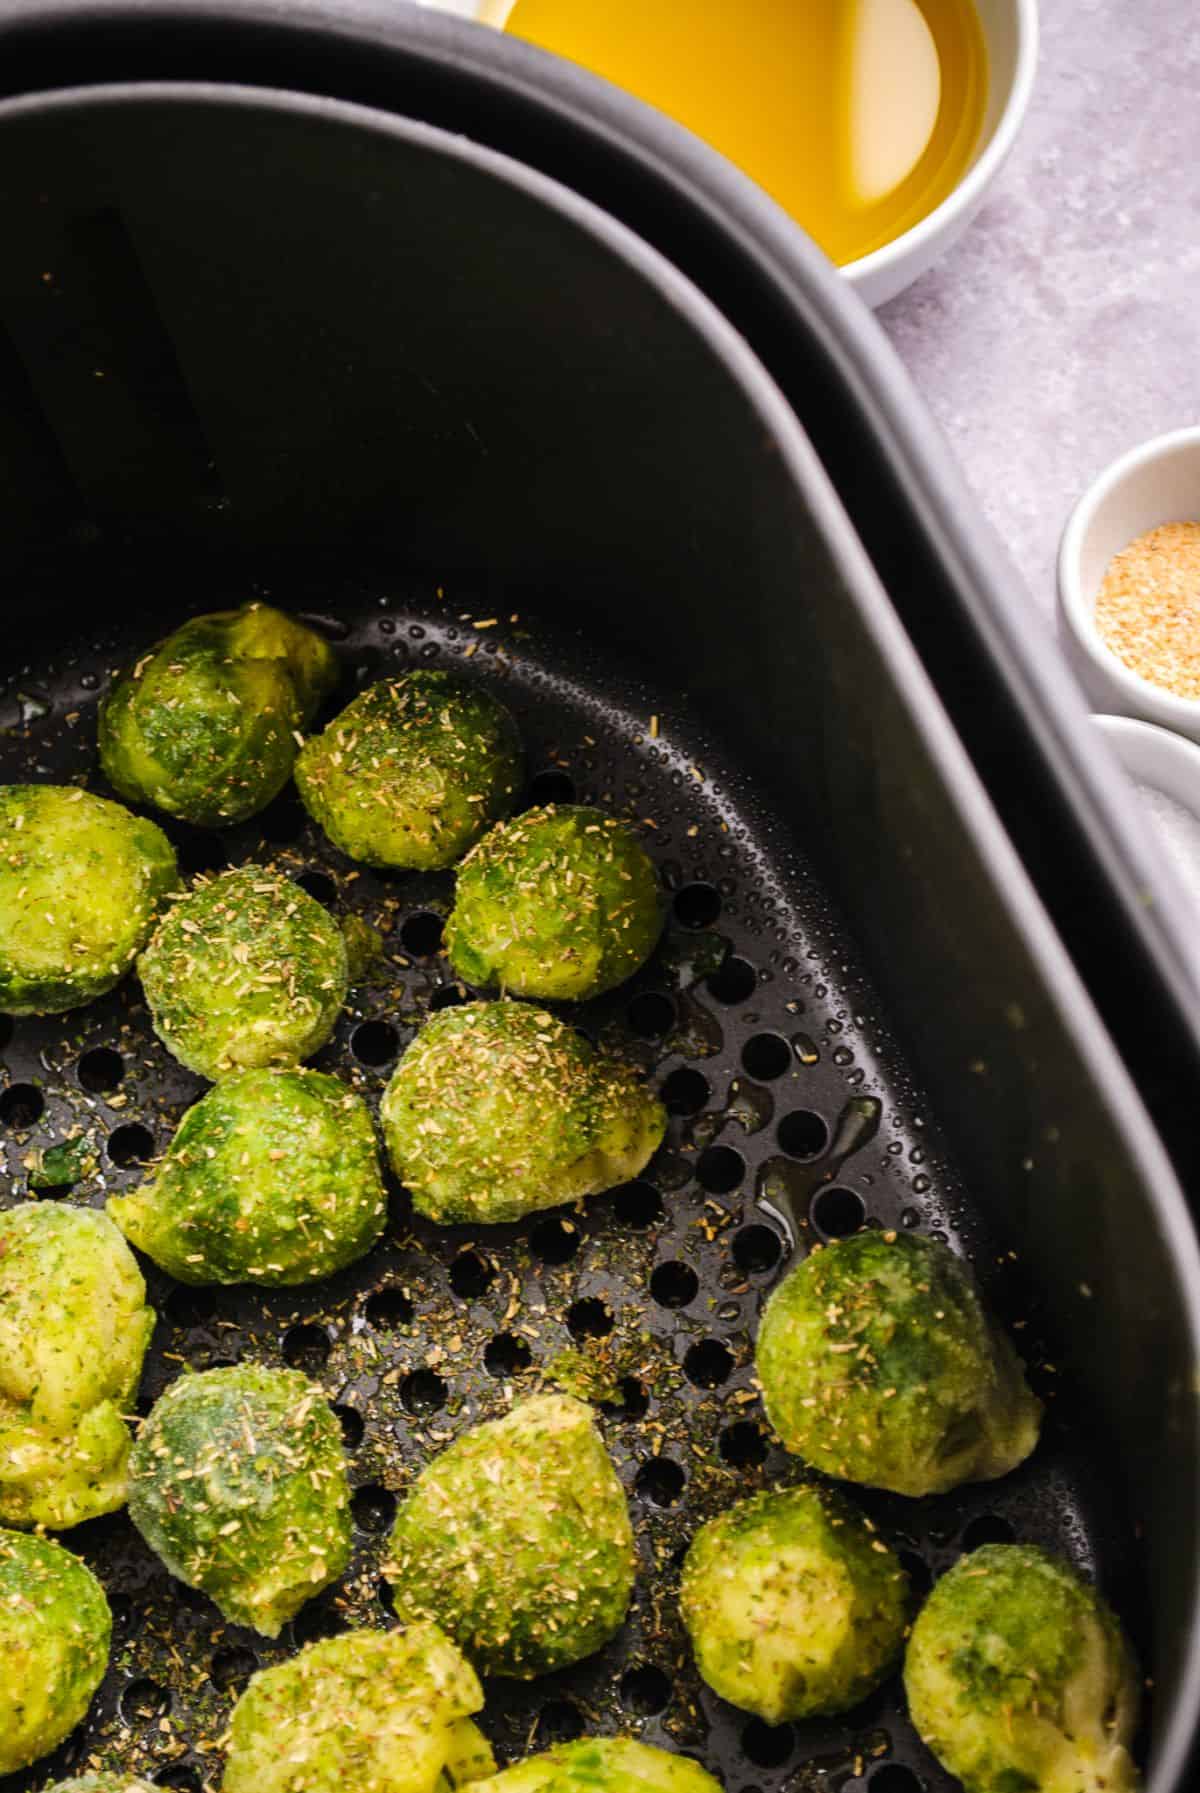 Air Fryer frozen Brussel sprouts step 2.1